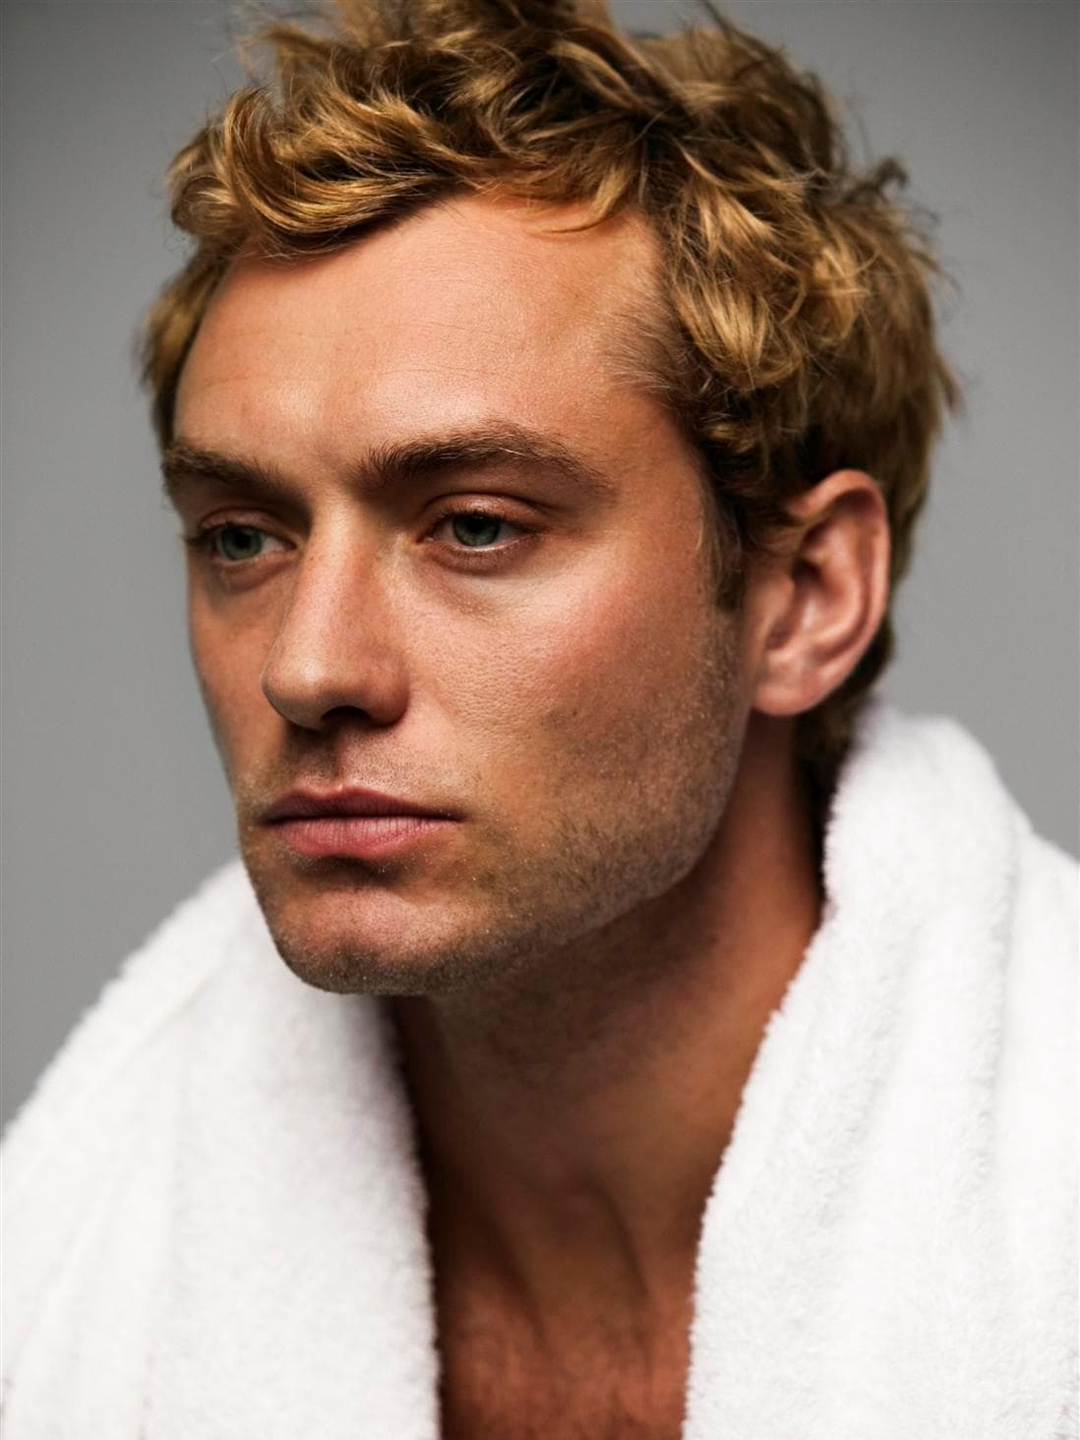 Jude Law biography